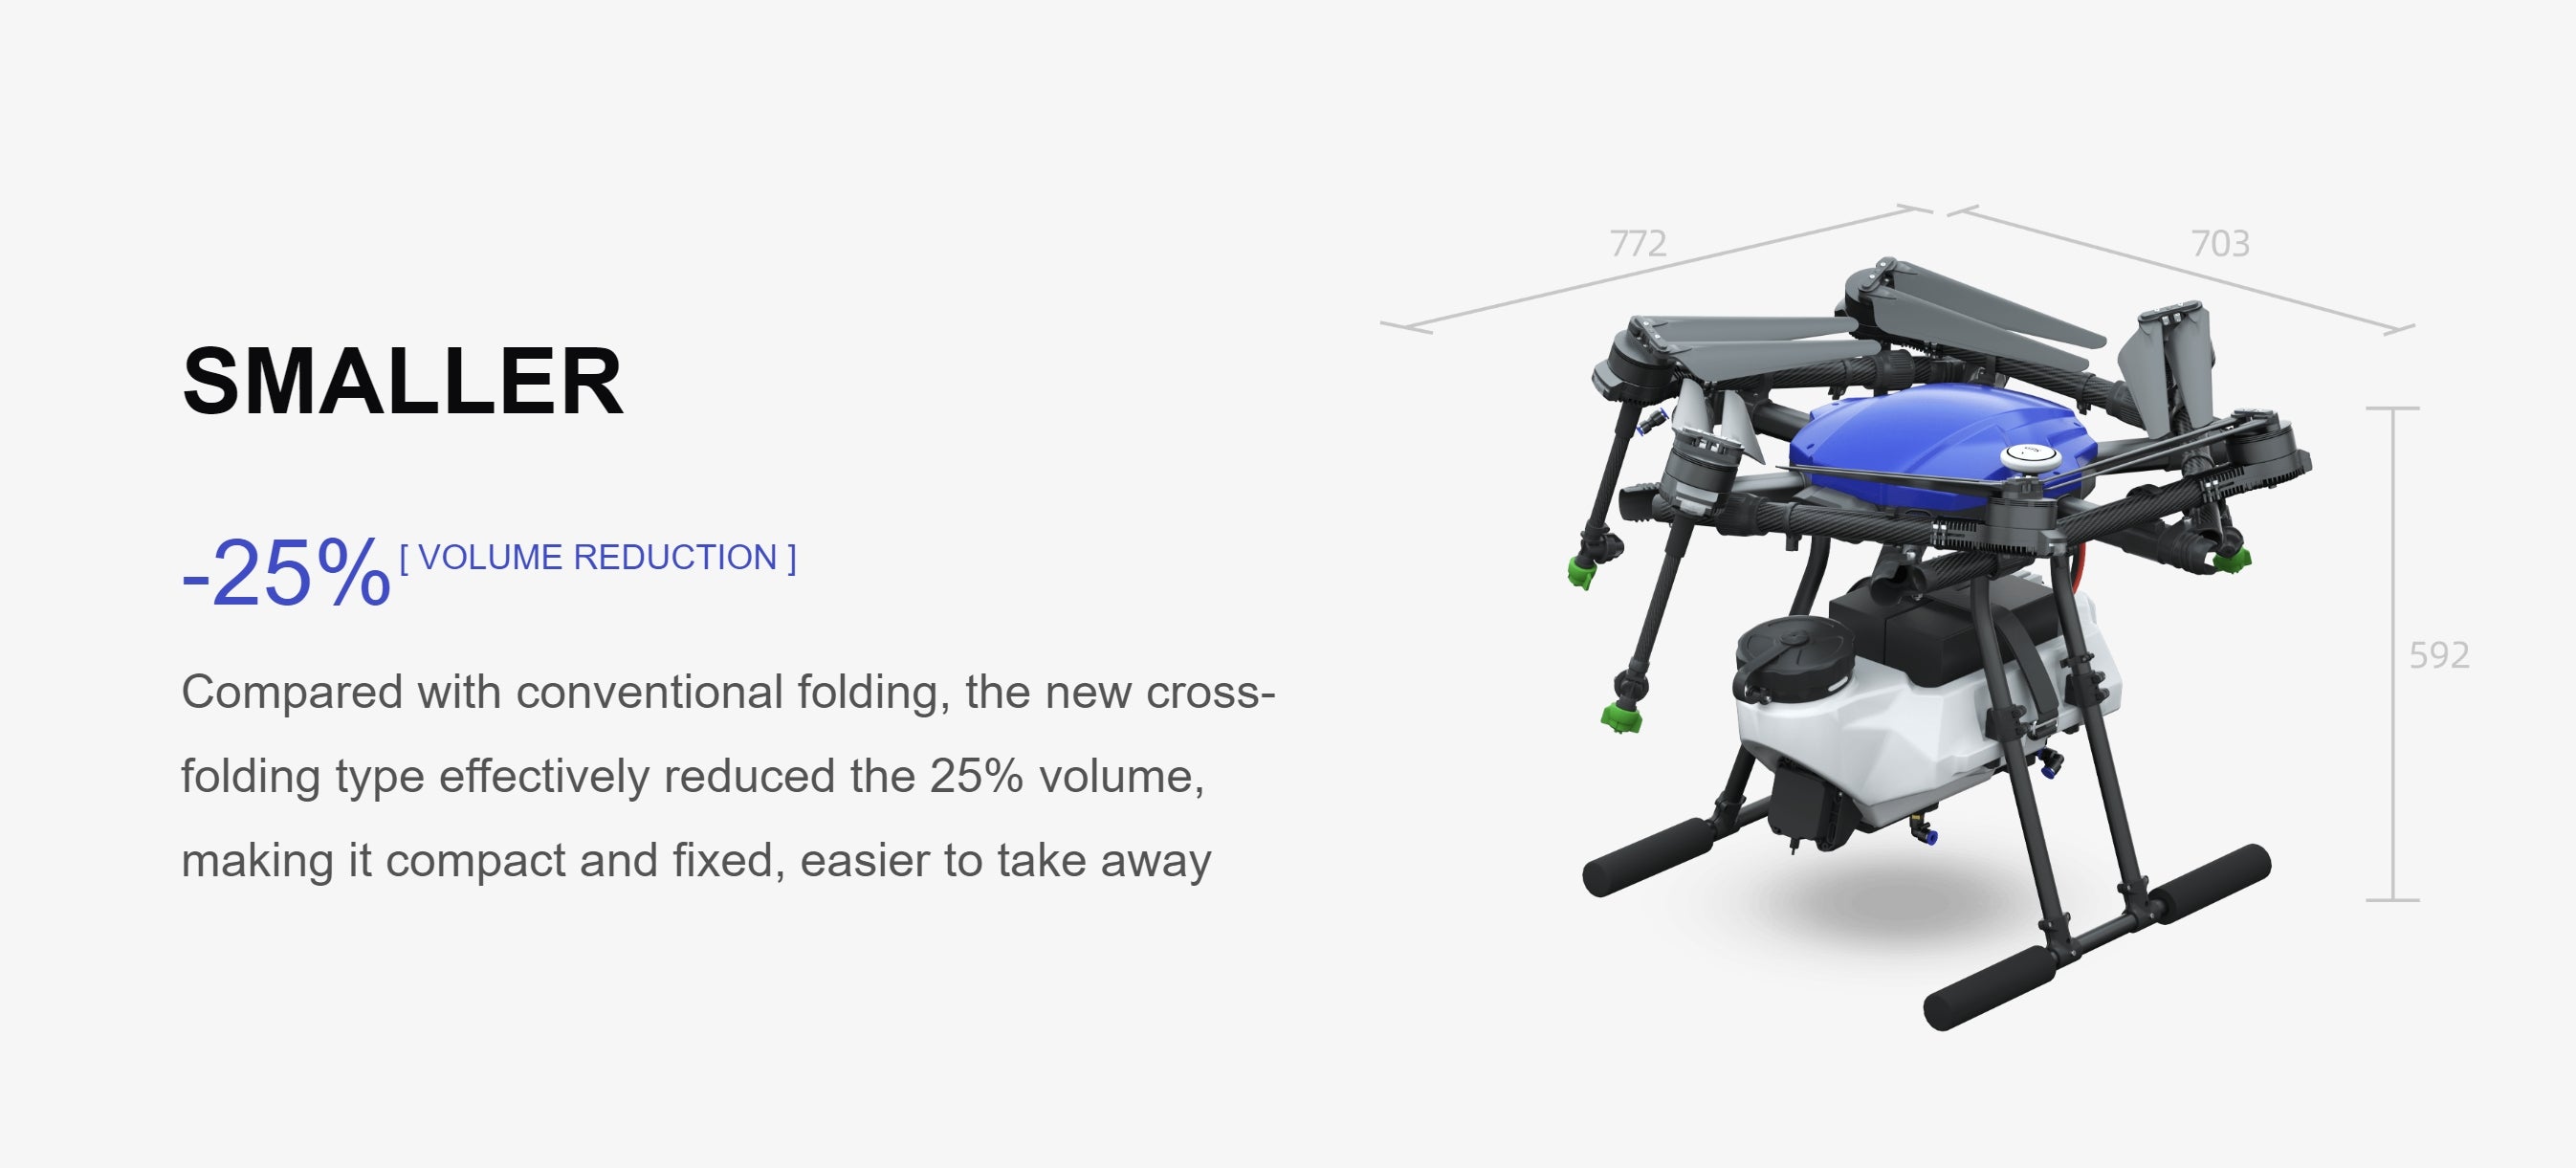 EFT E610M 10L Agriculture Drone, Compact design reduces volume by 25% for easier transportation.